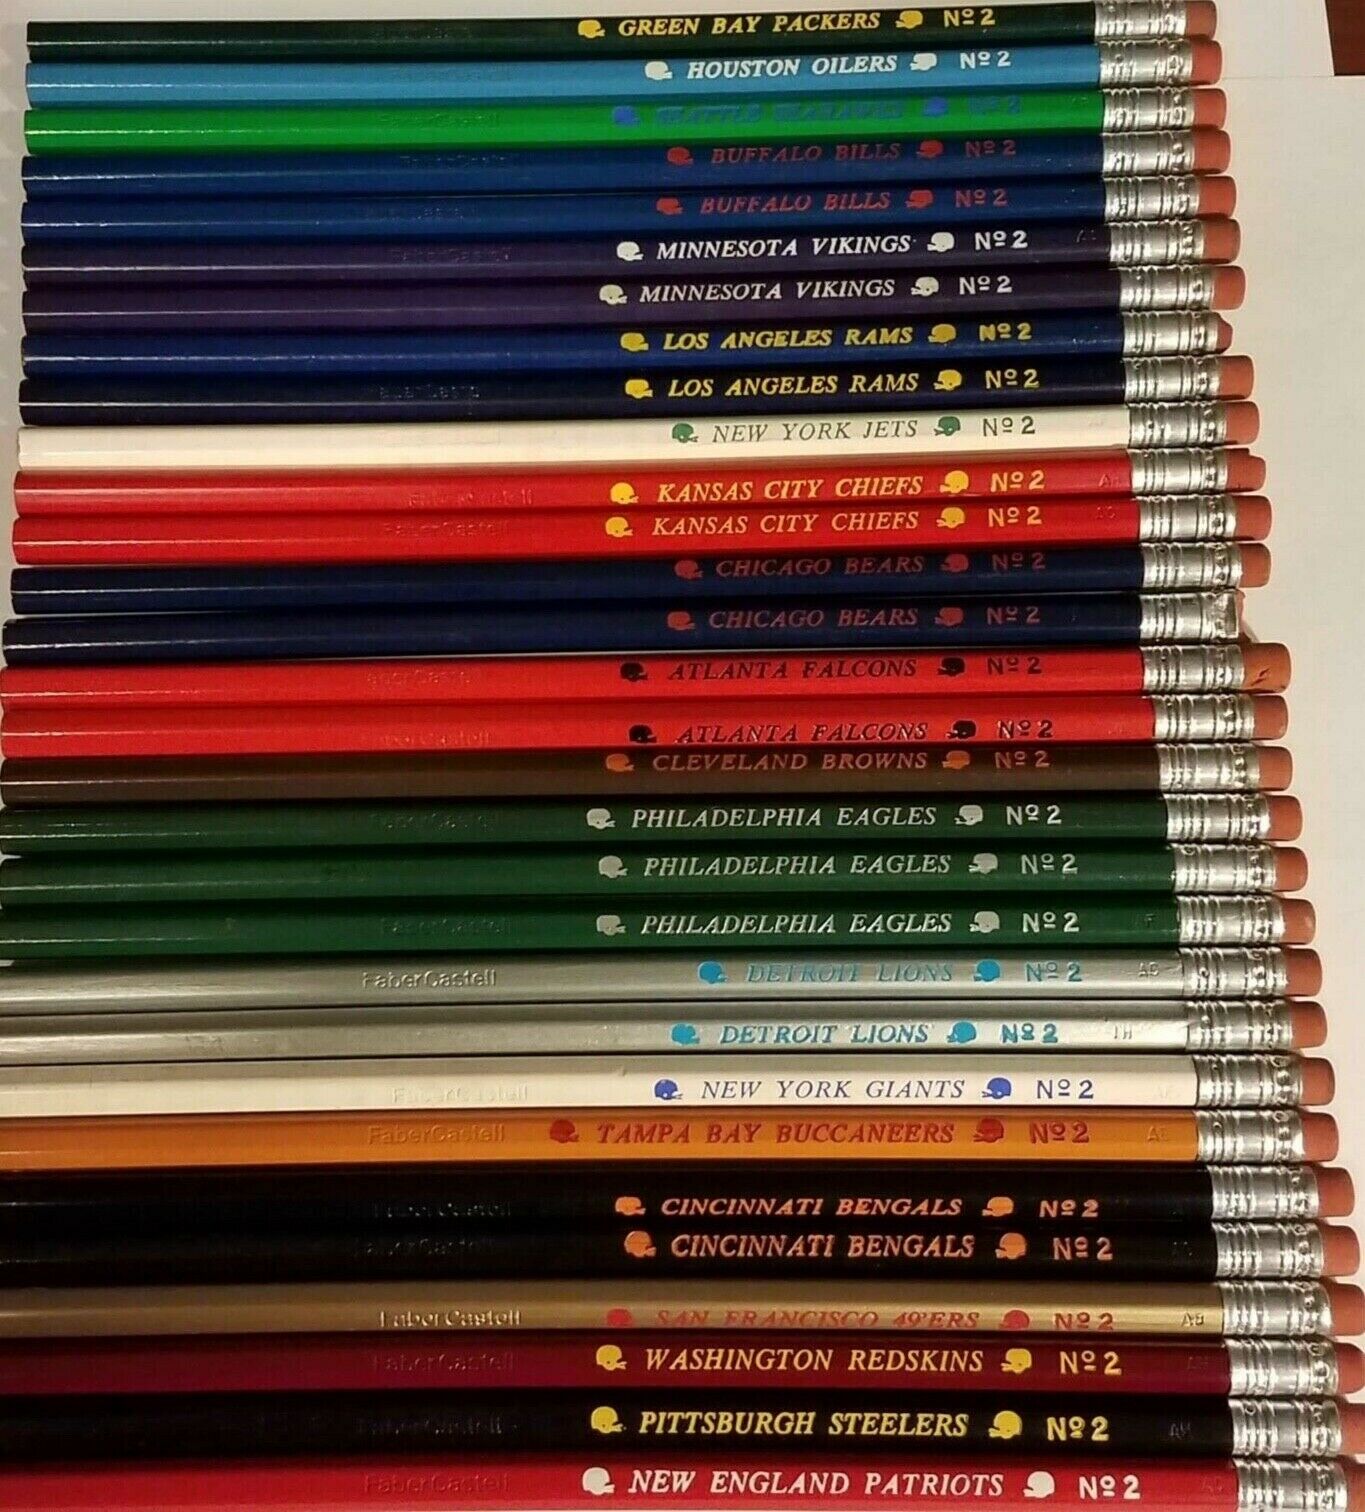 Papergreat: The pencils of Seminole Middle School